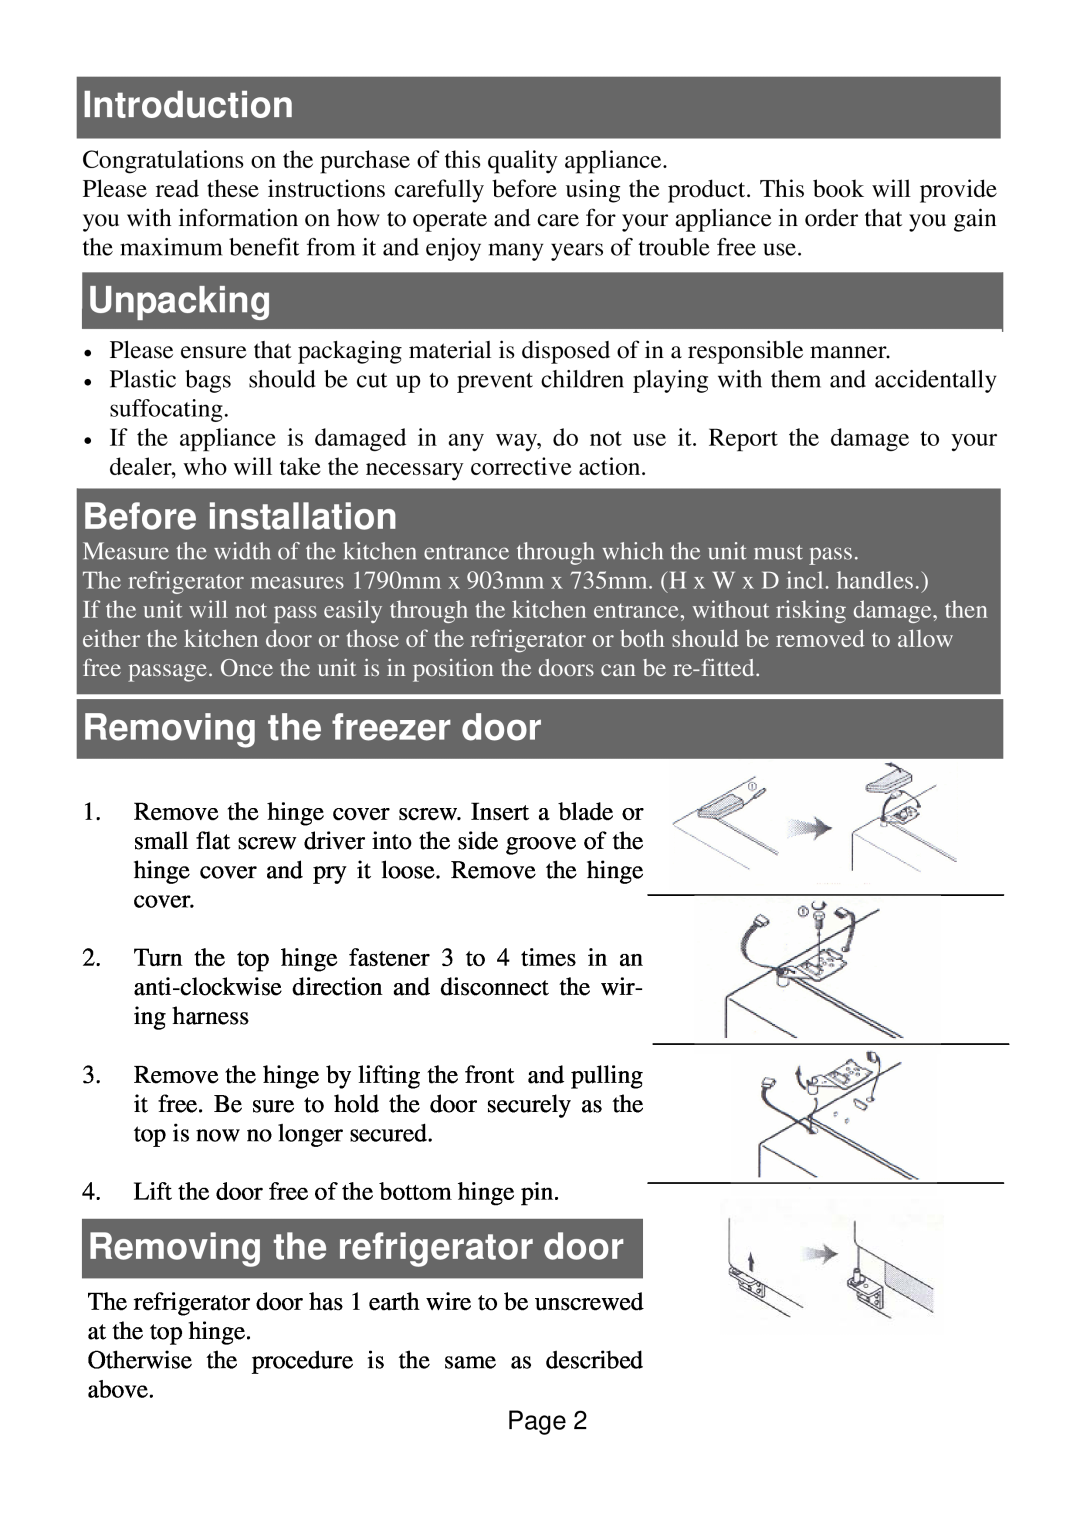 Defy Appliances 570 owner manual Introduction, Unpacking, Before installation, Removing the freezer door 